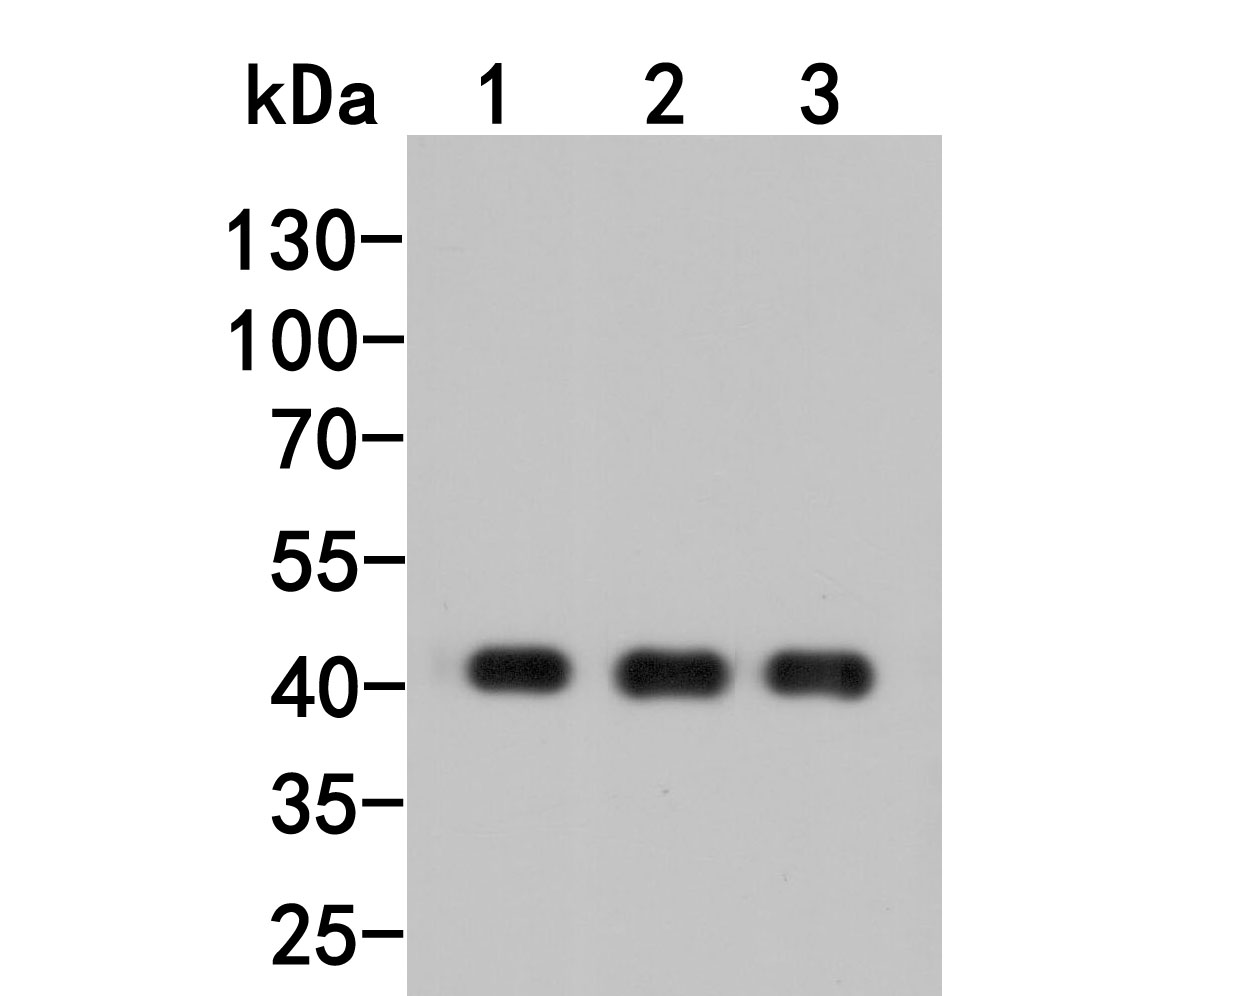 Western blot analysis of beta Actin (HRP conjugated) on different lysates. Proteins were transferred to a PVDF membrane and blocked with 5% BSA in PBS for 1 hour at room temperature. The primary antibody (M1210-5, 1/1,000) was used in 5% BSA at room temperature for 2 hours.<br />
Positive control: <br />
Lane 1: PC12 cell lysate<br />
Lane 2: Hela cell lysate<br />
Lane 3: NIH/3T3 cell lysate